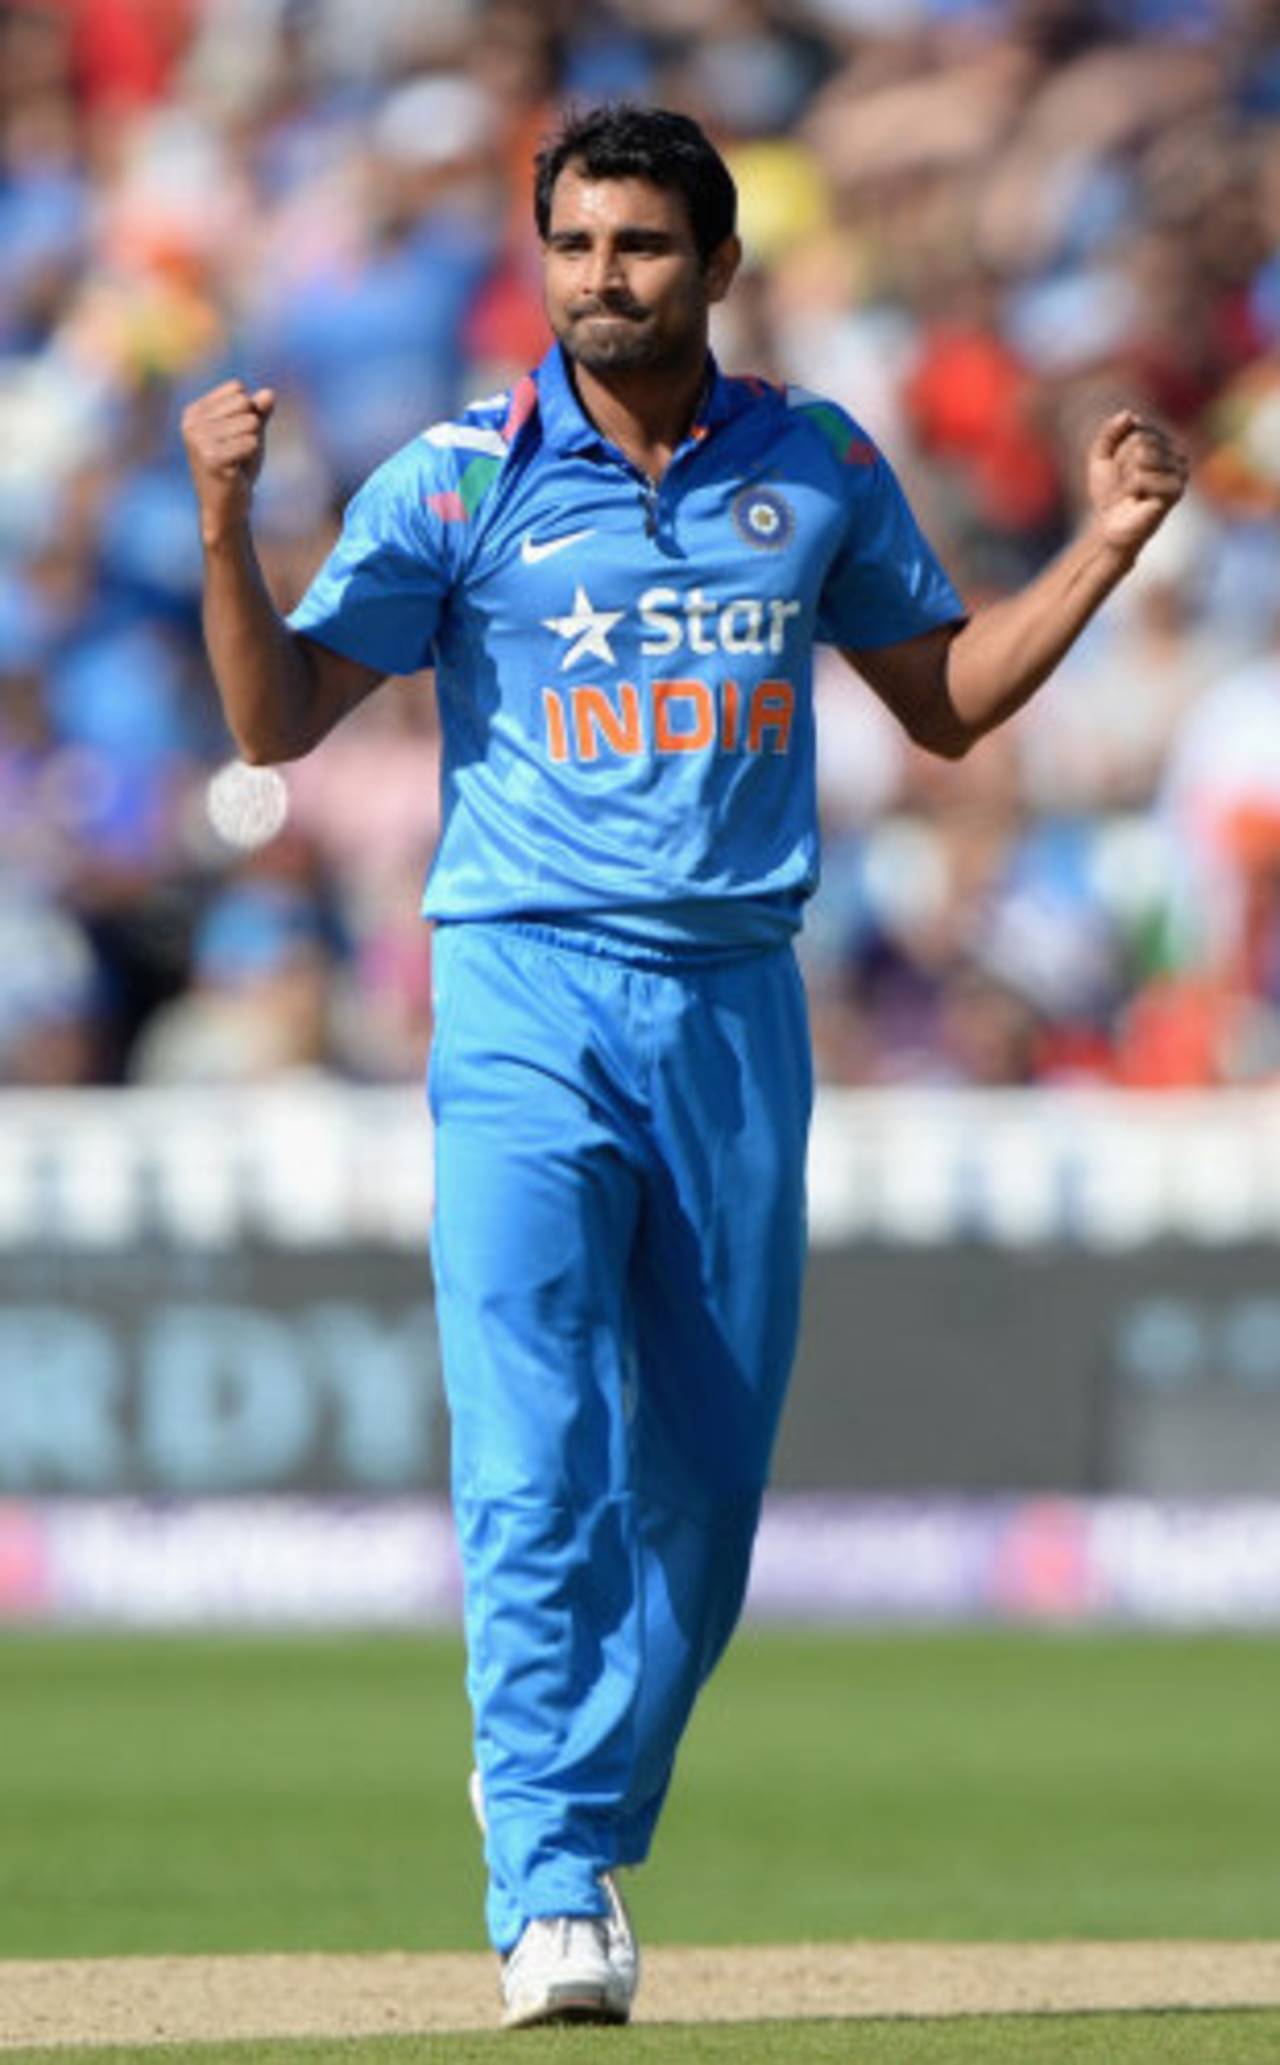 Mohammed Shami took the first wicket of the afternoon, England v India, only T20, Edgbaston, September 7, 2014